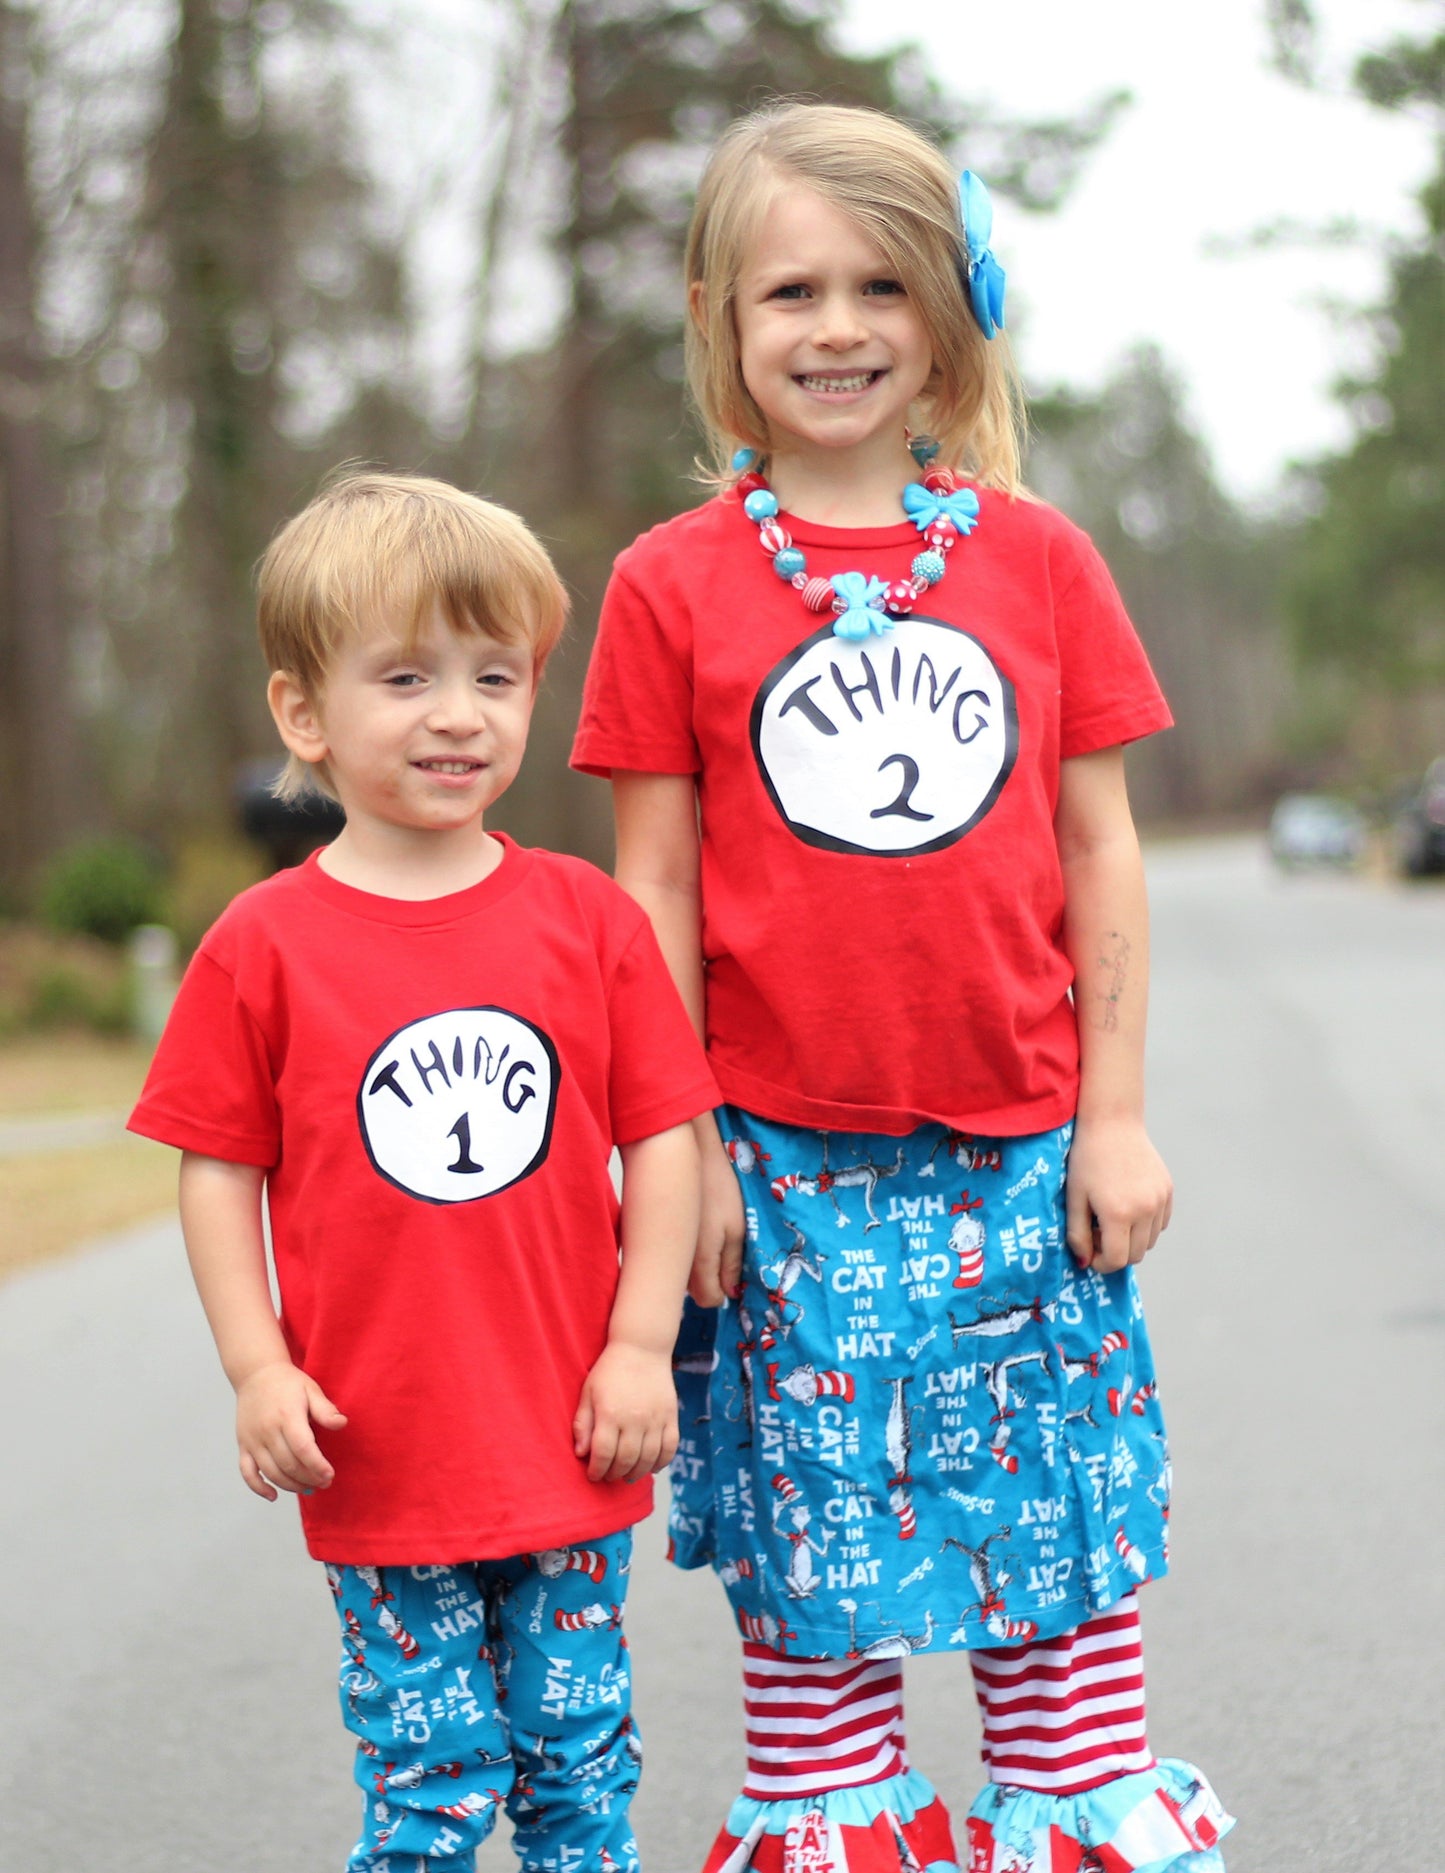 Thing 1 & Thing 2 Tees -Suess Inspired